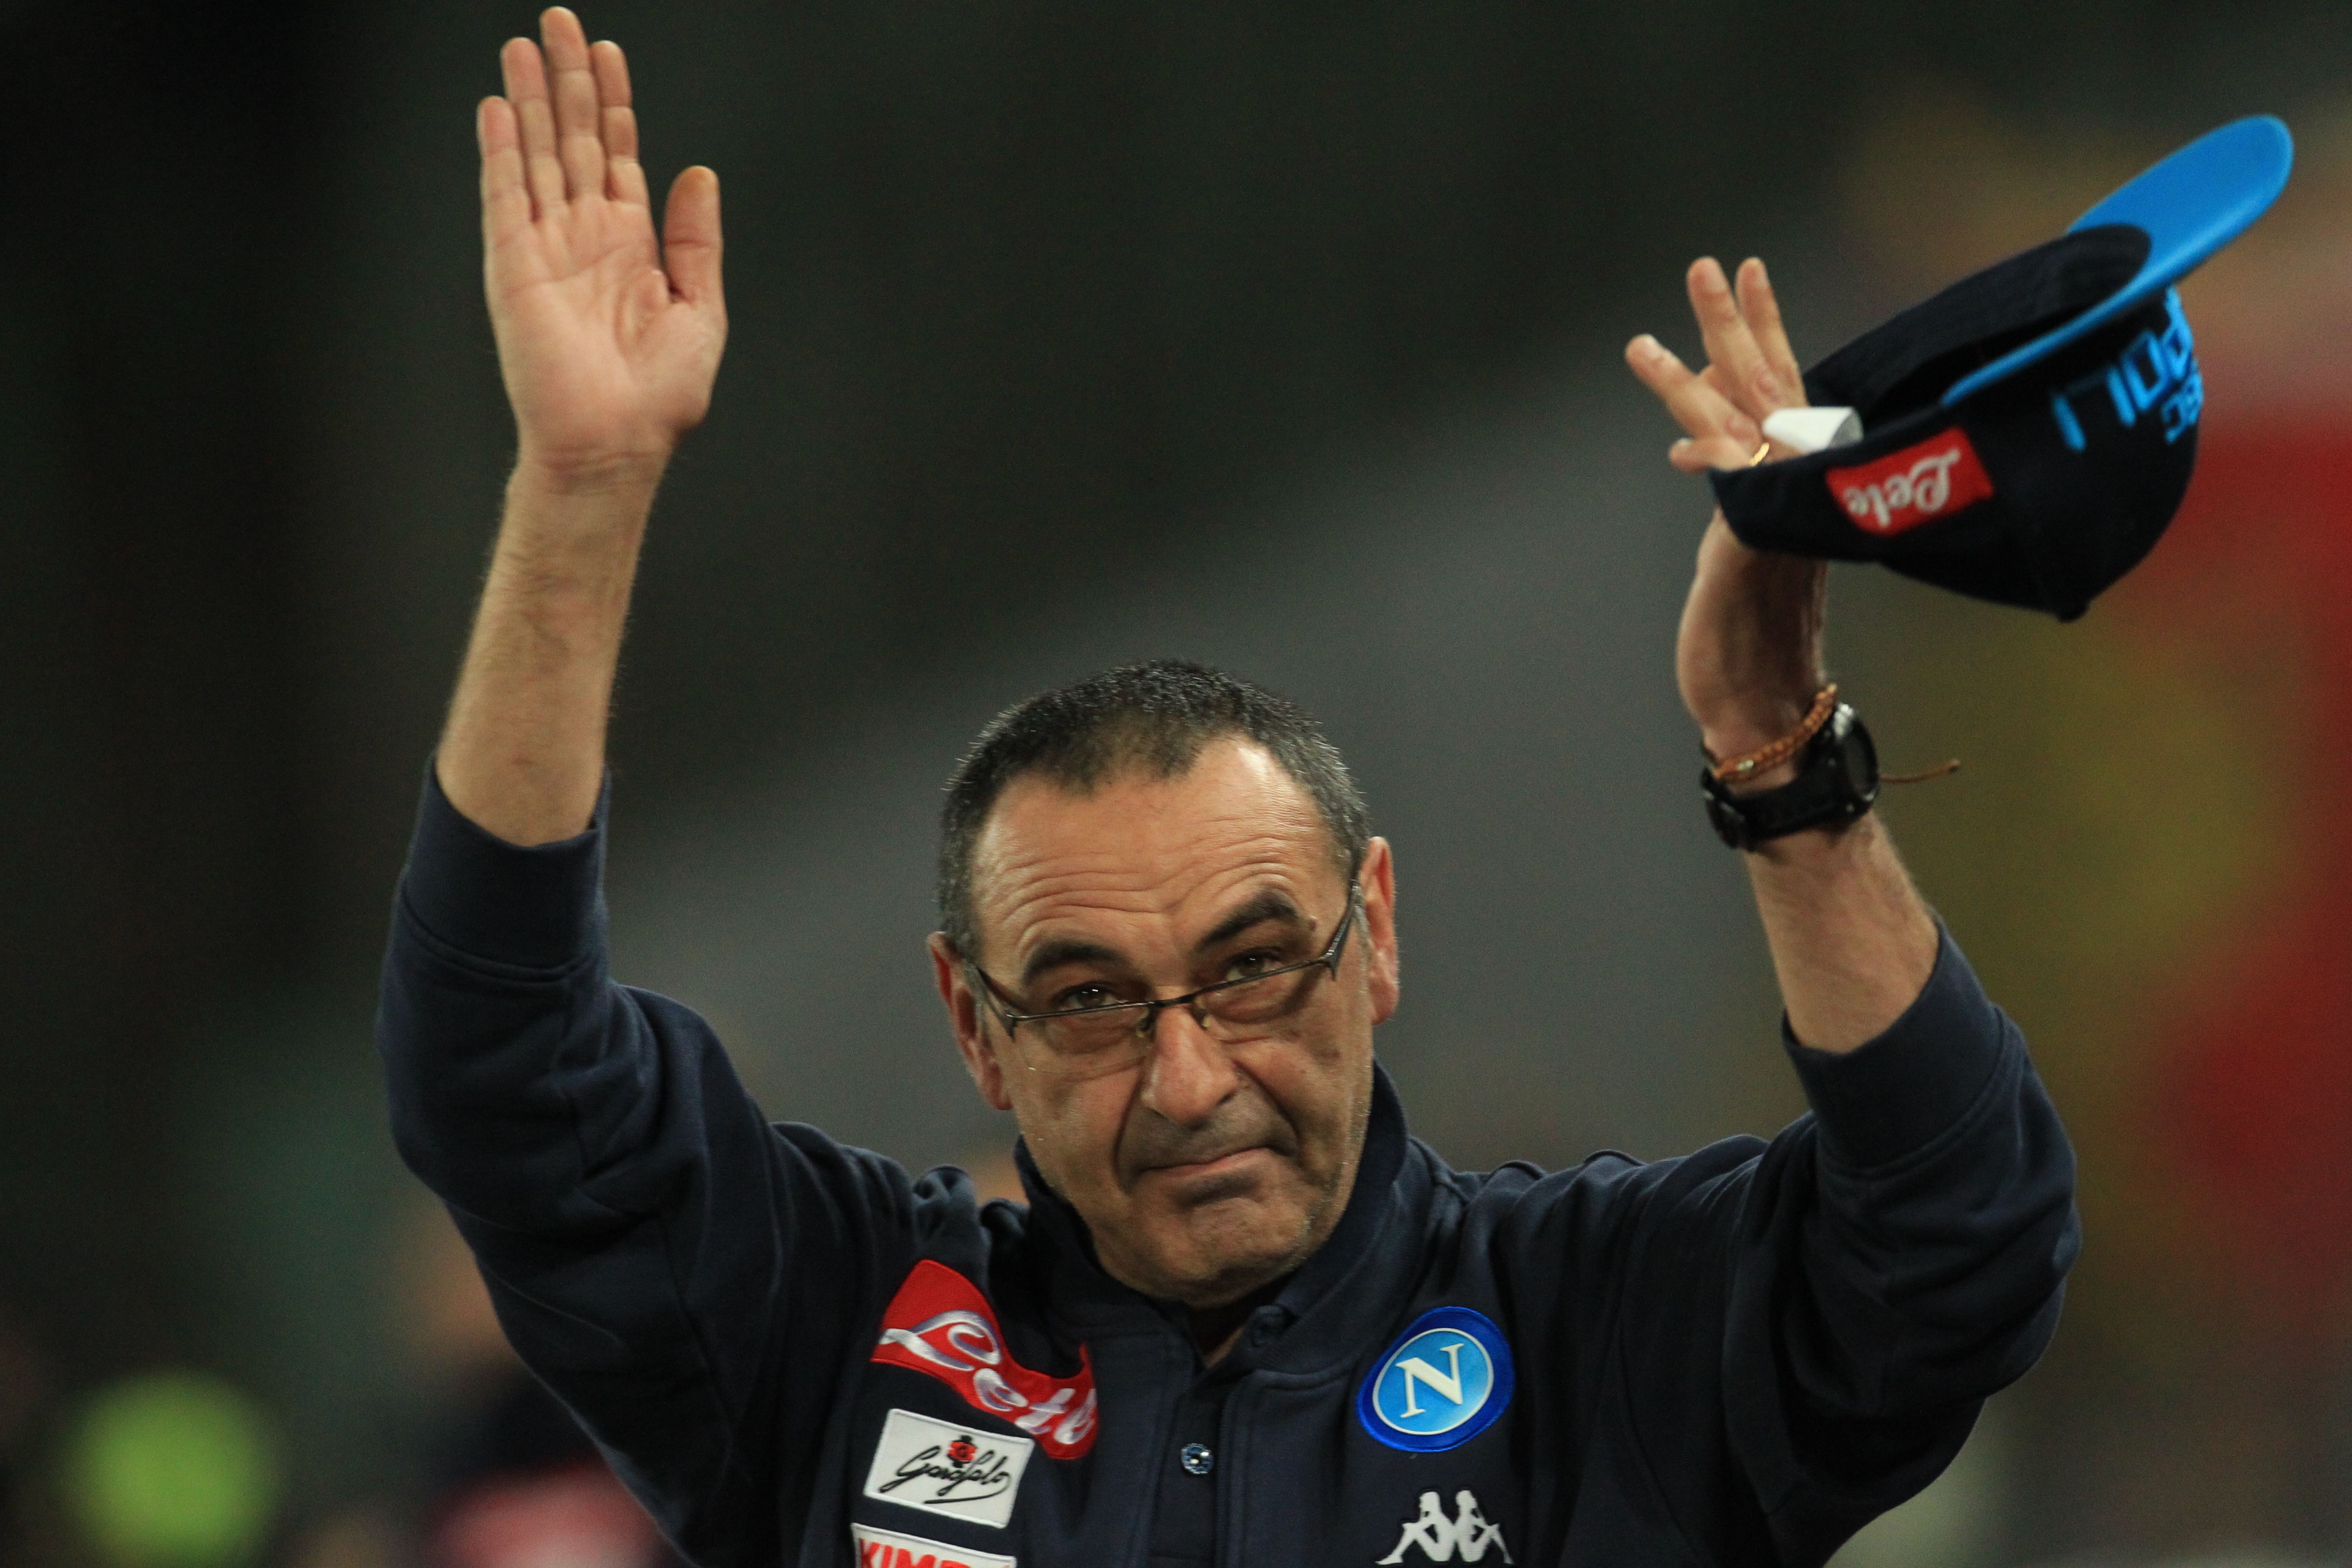 Napoli's coach Maurizio Sarri greets fans before the Italian Serie A football match SSC Napoli vs Genoa CFC on March 18, 2018 at the San Paolo Stadium. / AFP PHOTO / CARLO HERMANN        (Photo credit should read CARLO HERMANN/AFP/Getty Images)